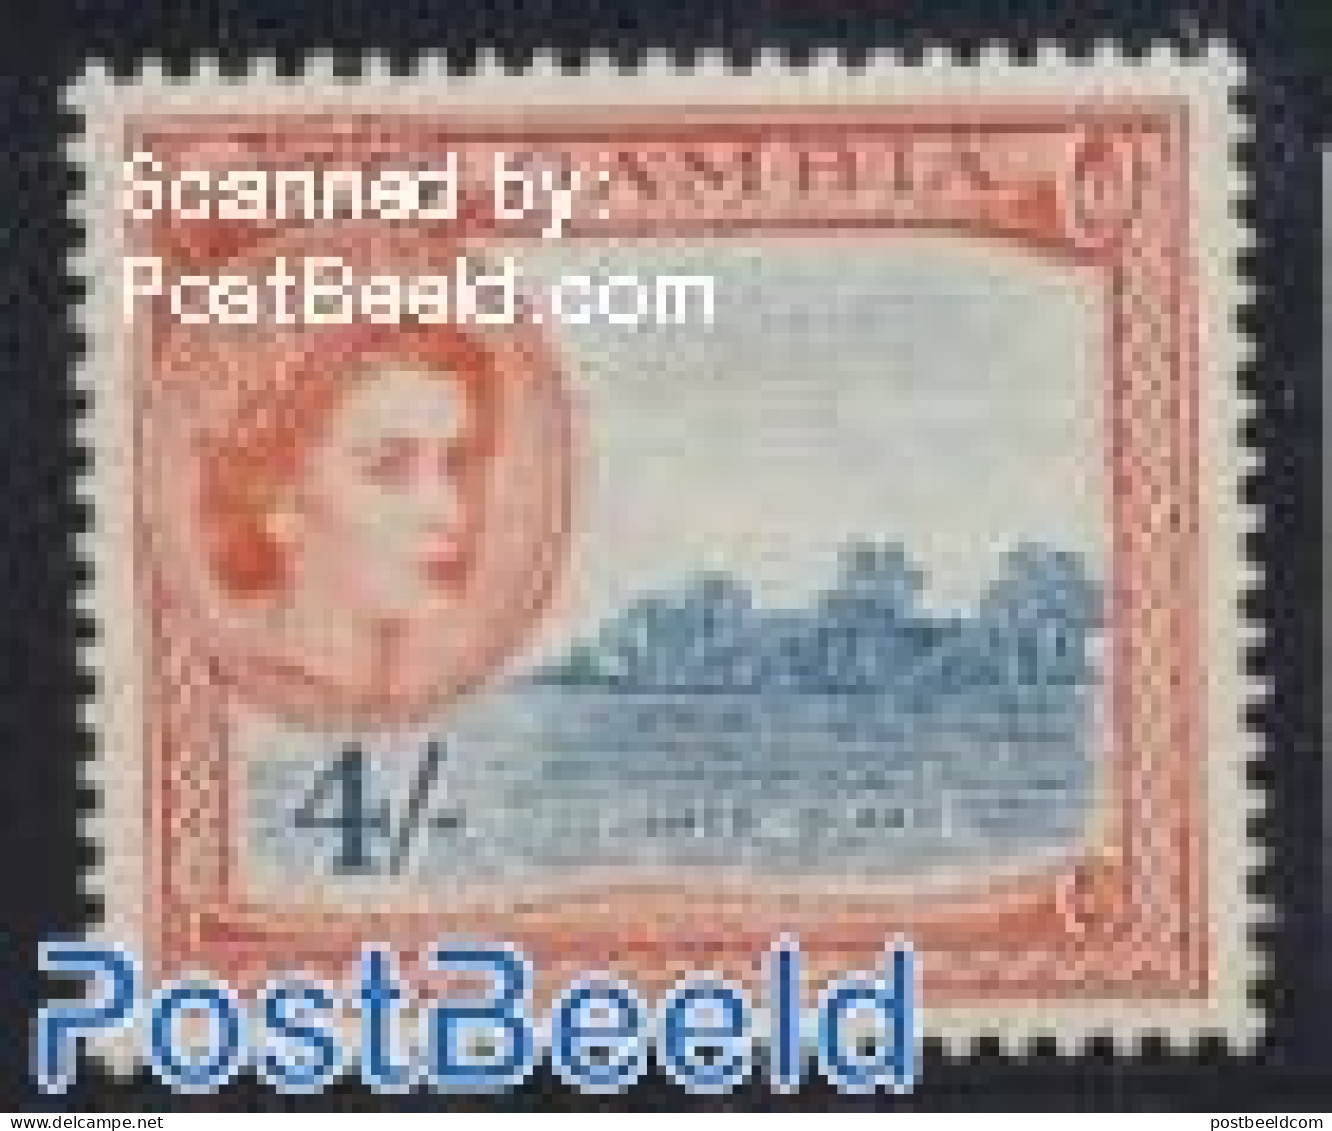 Gambia 1953 4Sh, James Island, Stamp Out Of Set, Unused (hinged), Nature - Gambia (...-1964)